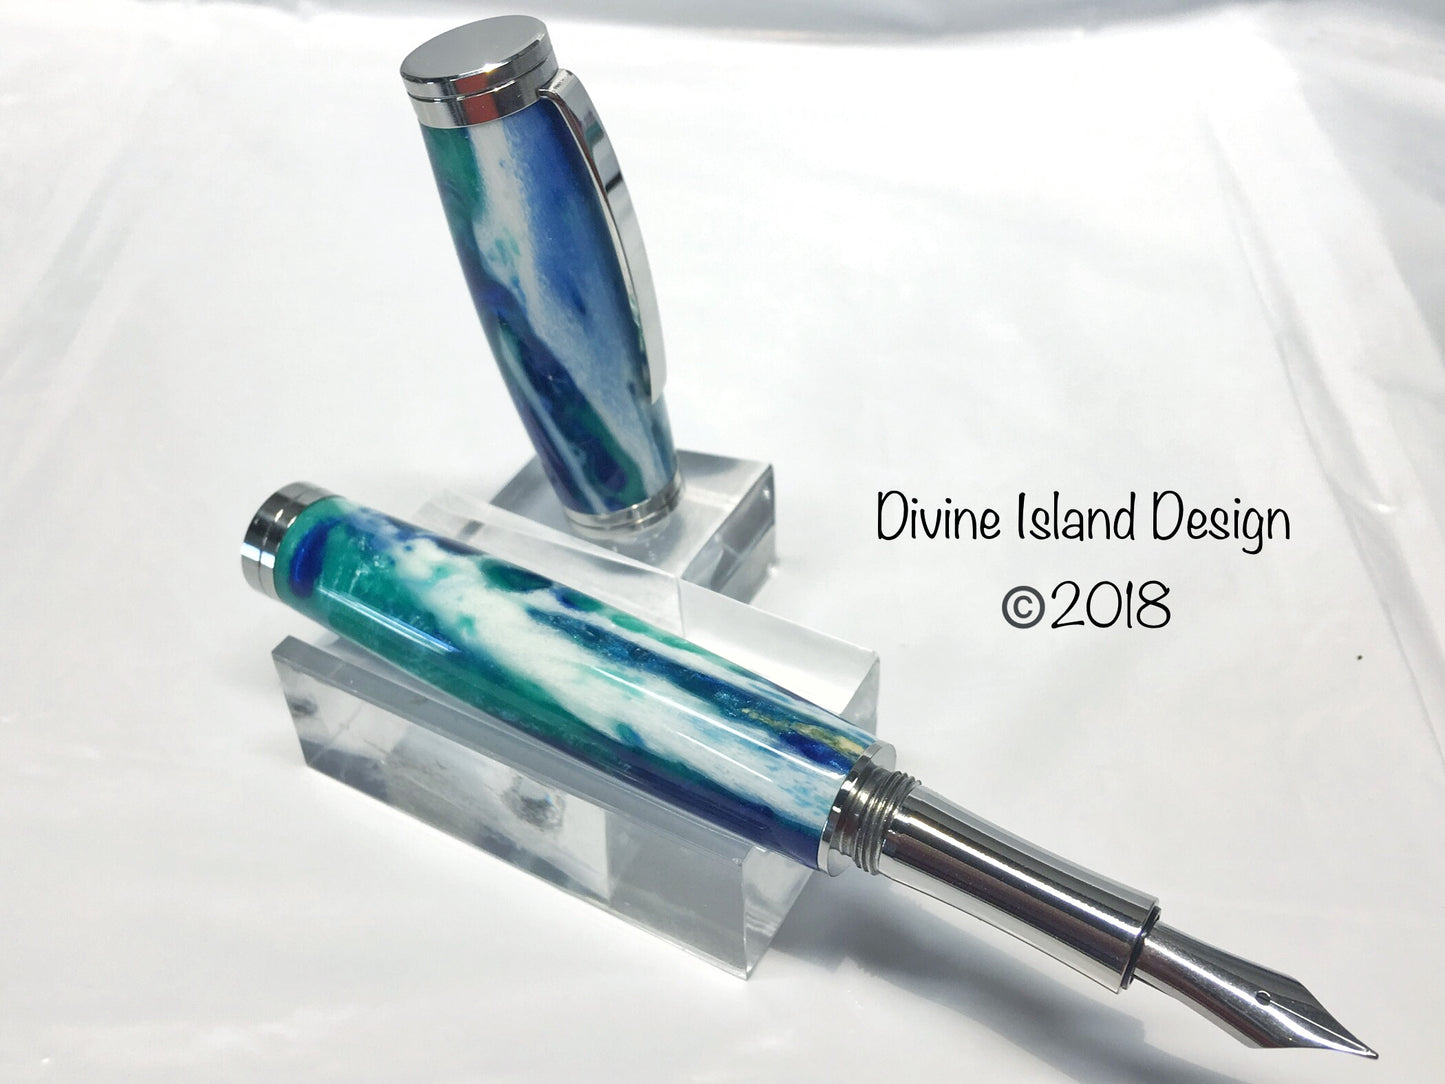 Shakespeare Fountain / Polished Stainless Steel - Hybrid / Gator Jaw and Blue/Green Resin